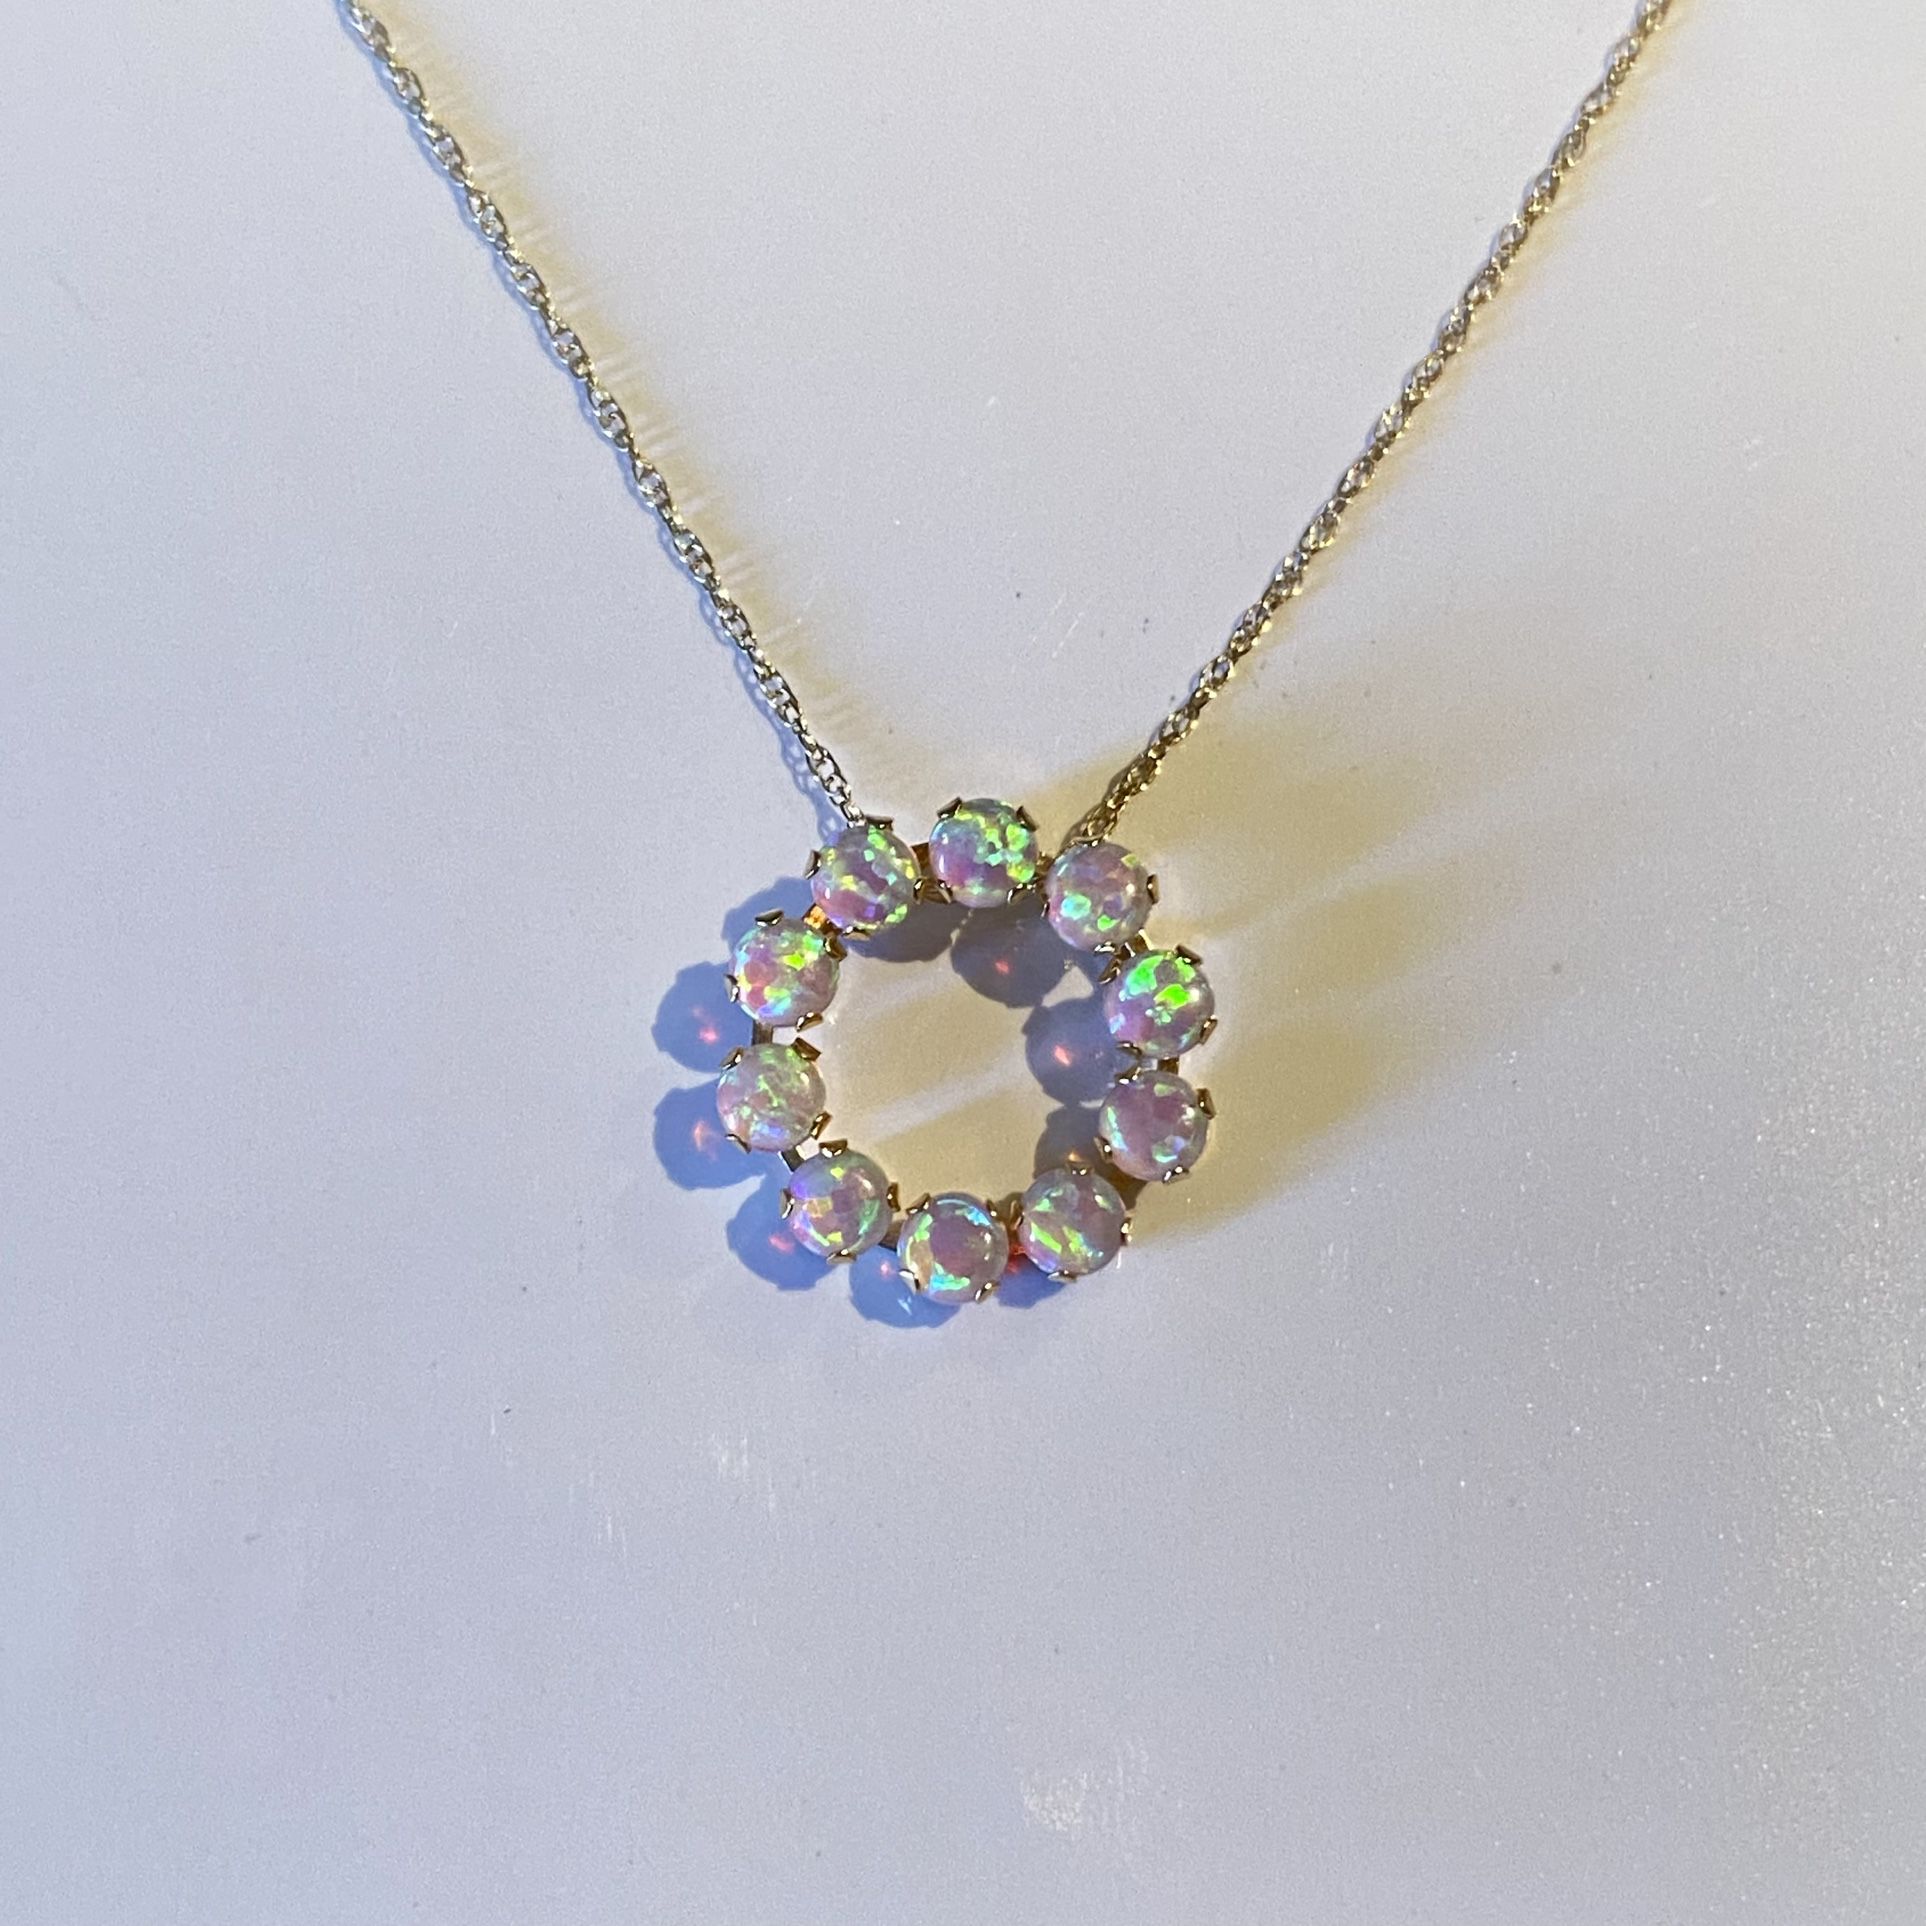 10k Solid Yellow Gold Opal Necklace Stamped 10kt Chain + Pendant